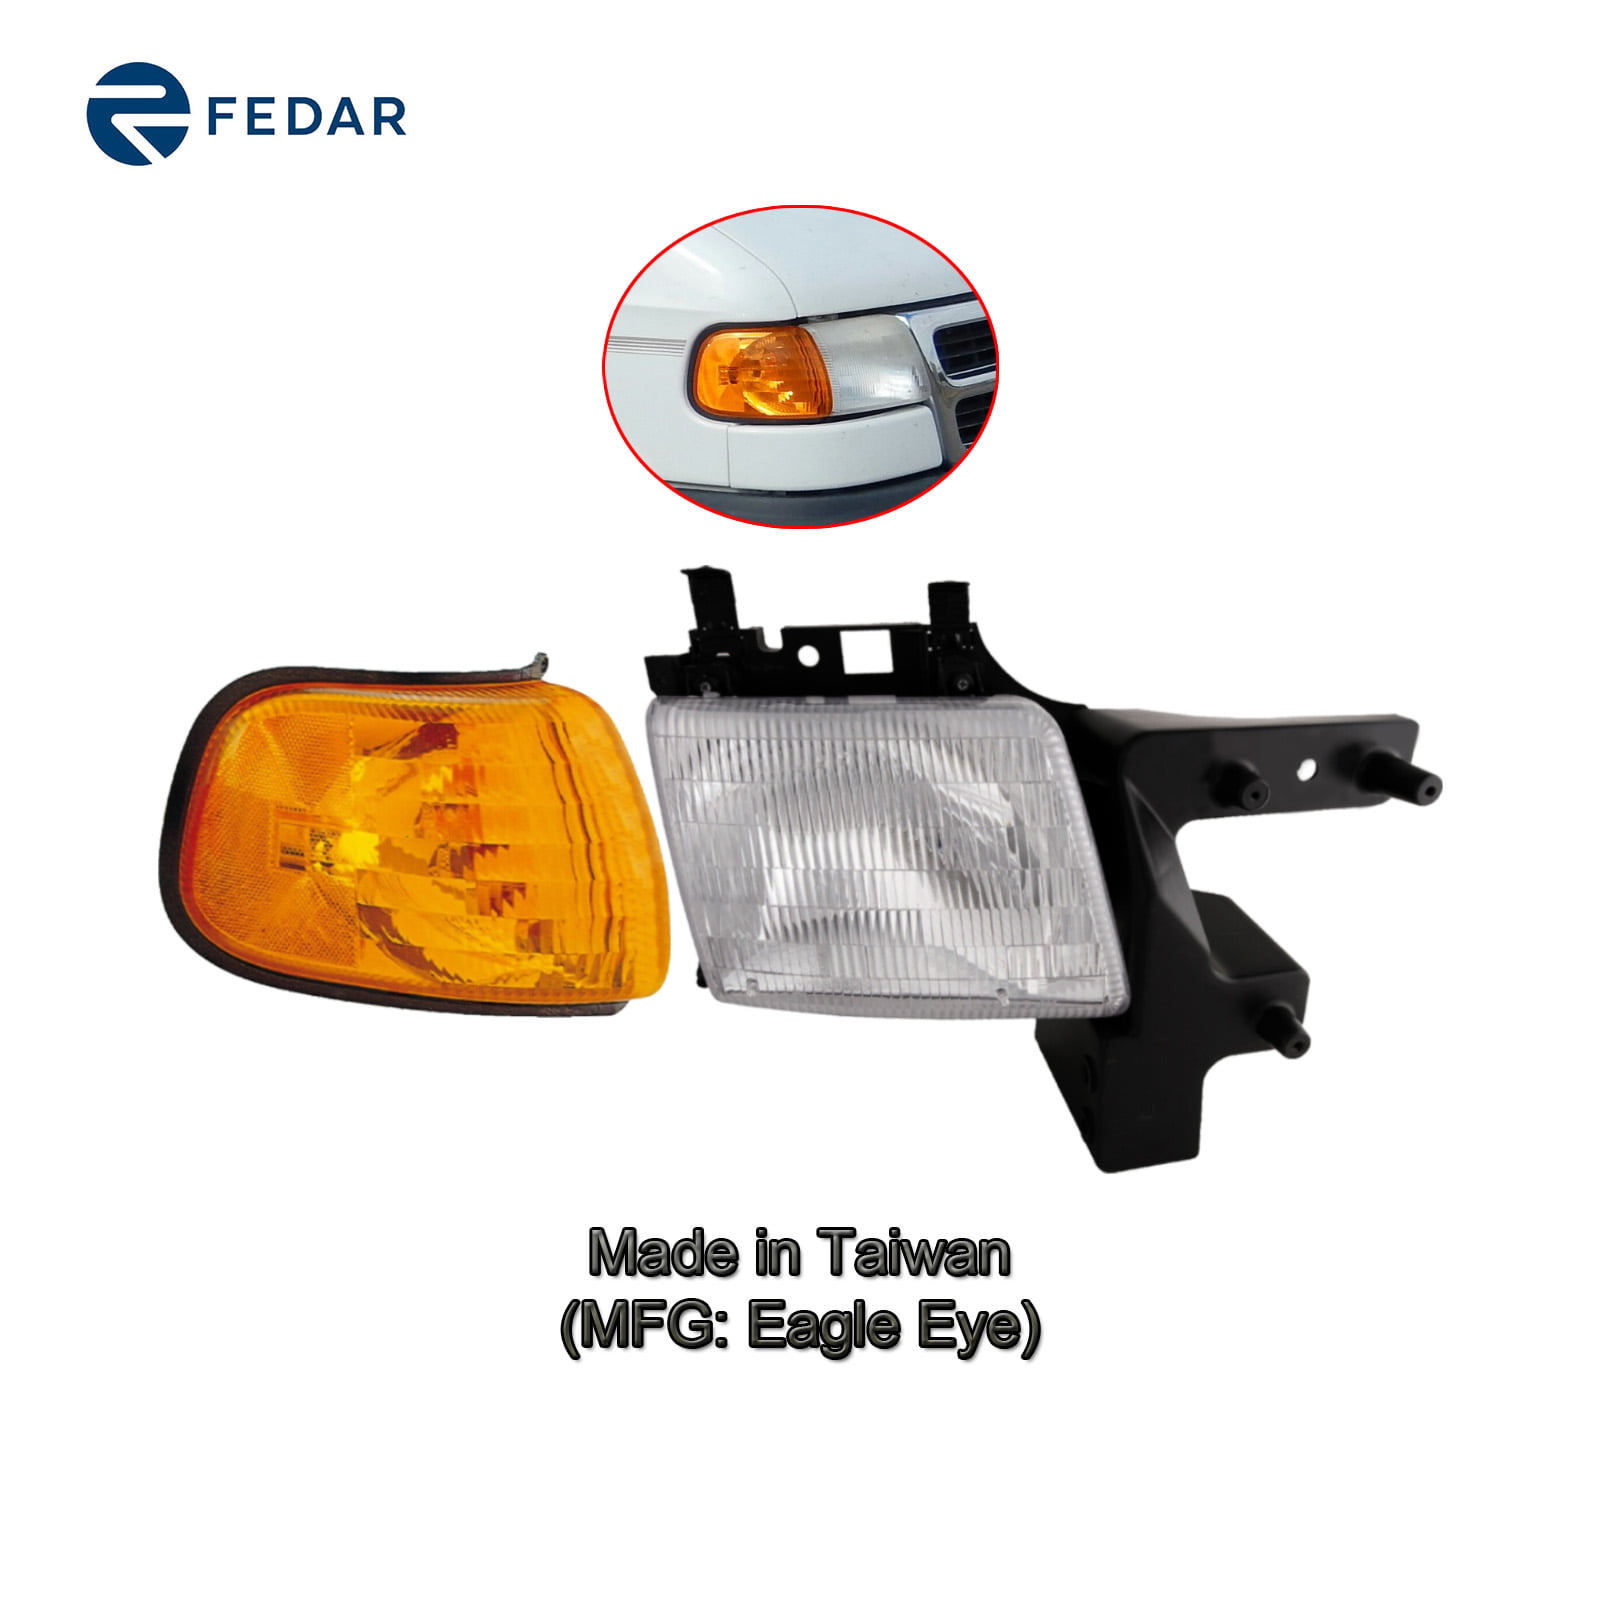 Drivers Park Signal Corner Marker Light Lamp with Amber & Clear Lens Replacement for Dodge Van 55076527AC 